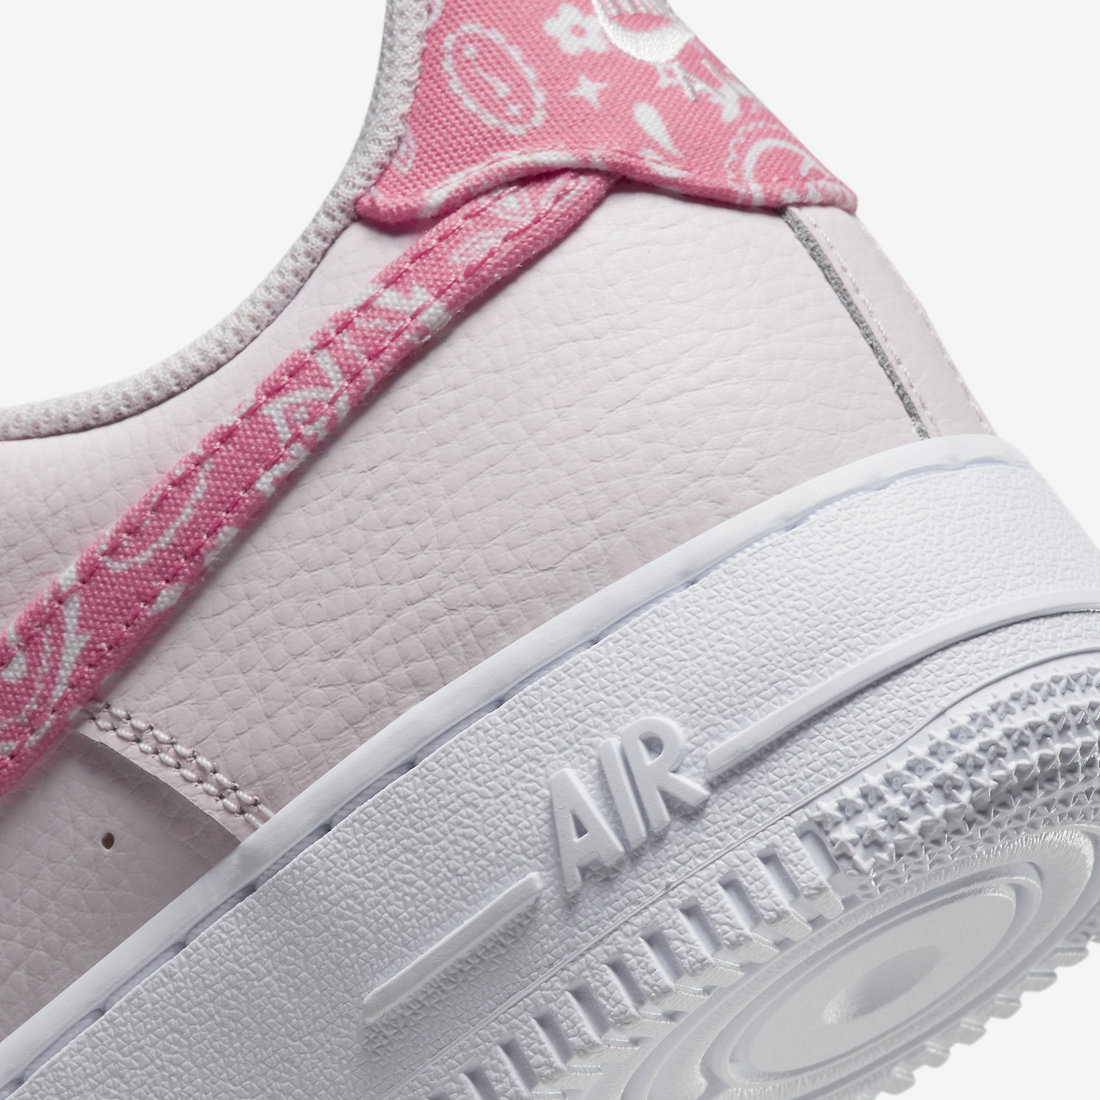 Nike Air Force 1 Low Pearl Pink Paisley FD1448-664 Release Date Info